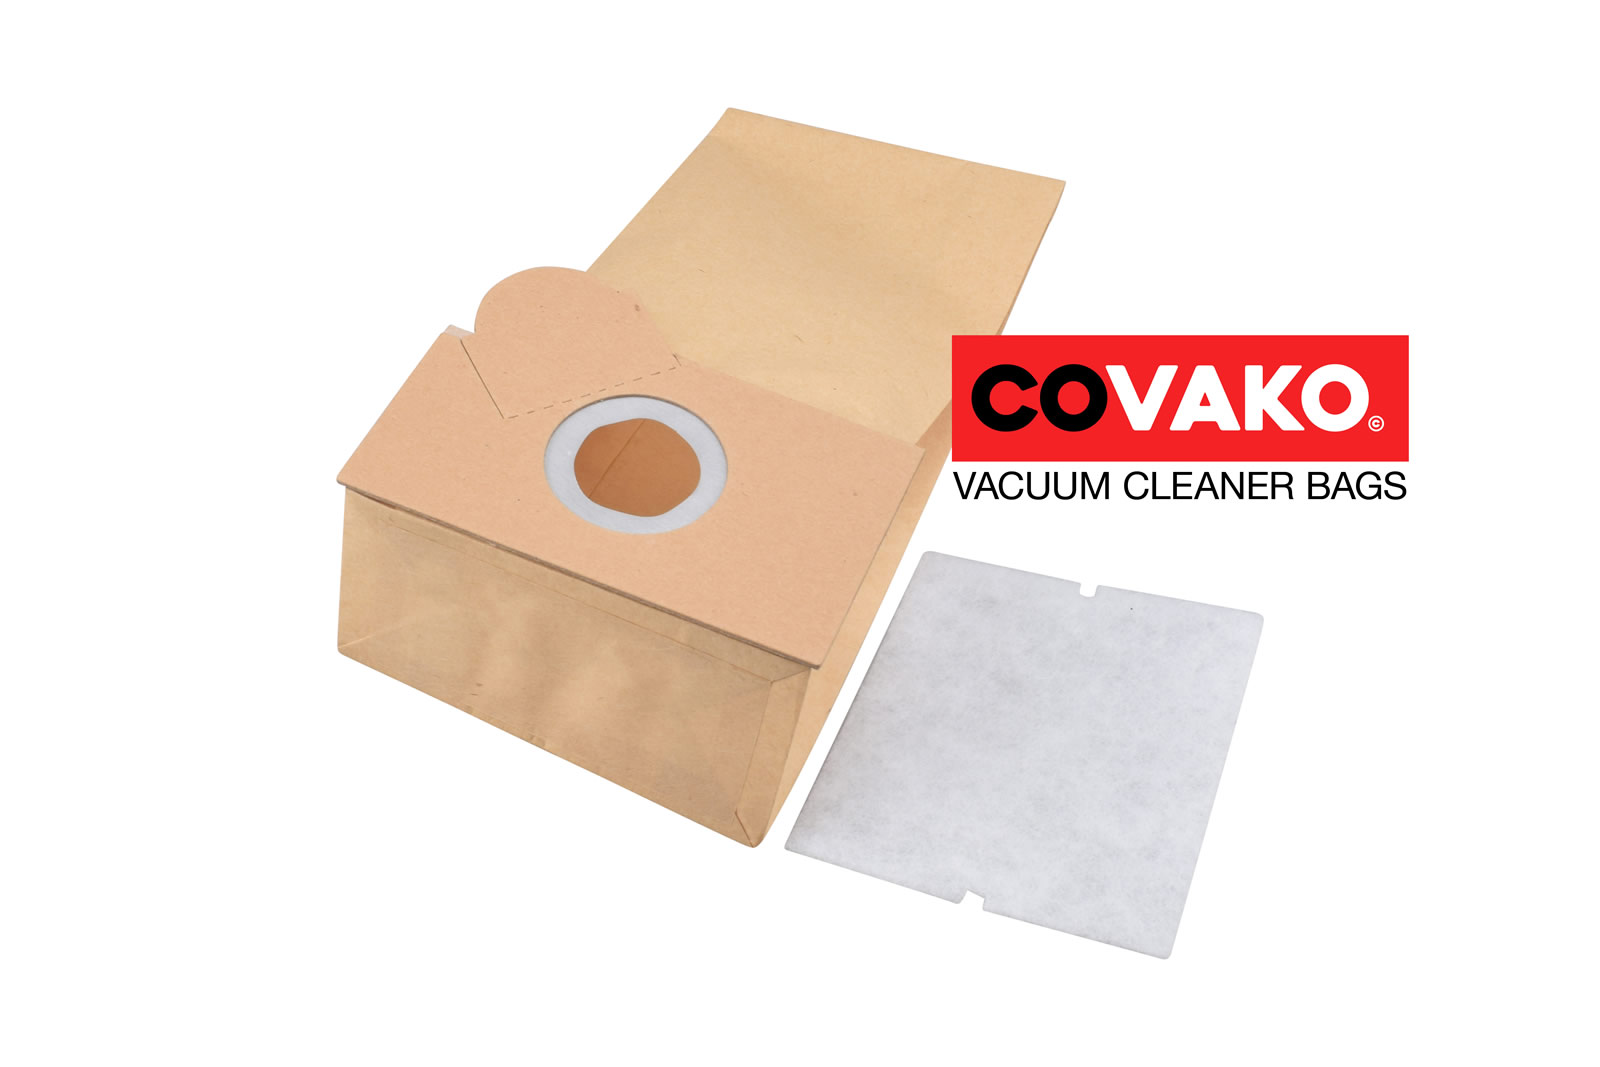 Nilco RS 17 / Paper - Nilco vacuum cleaner bags